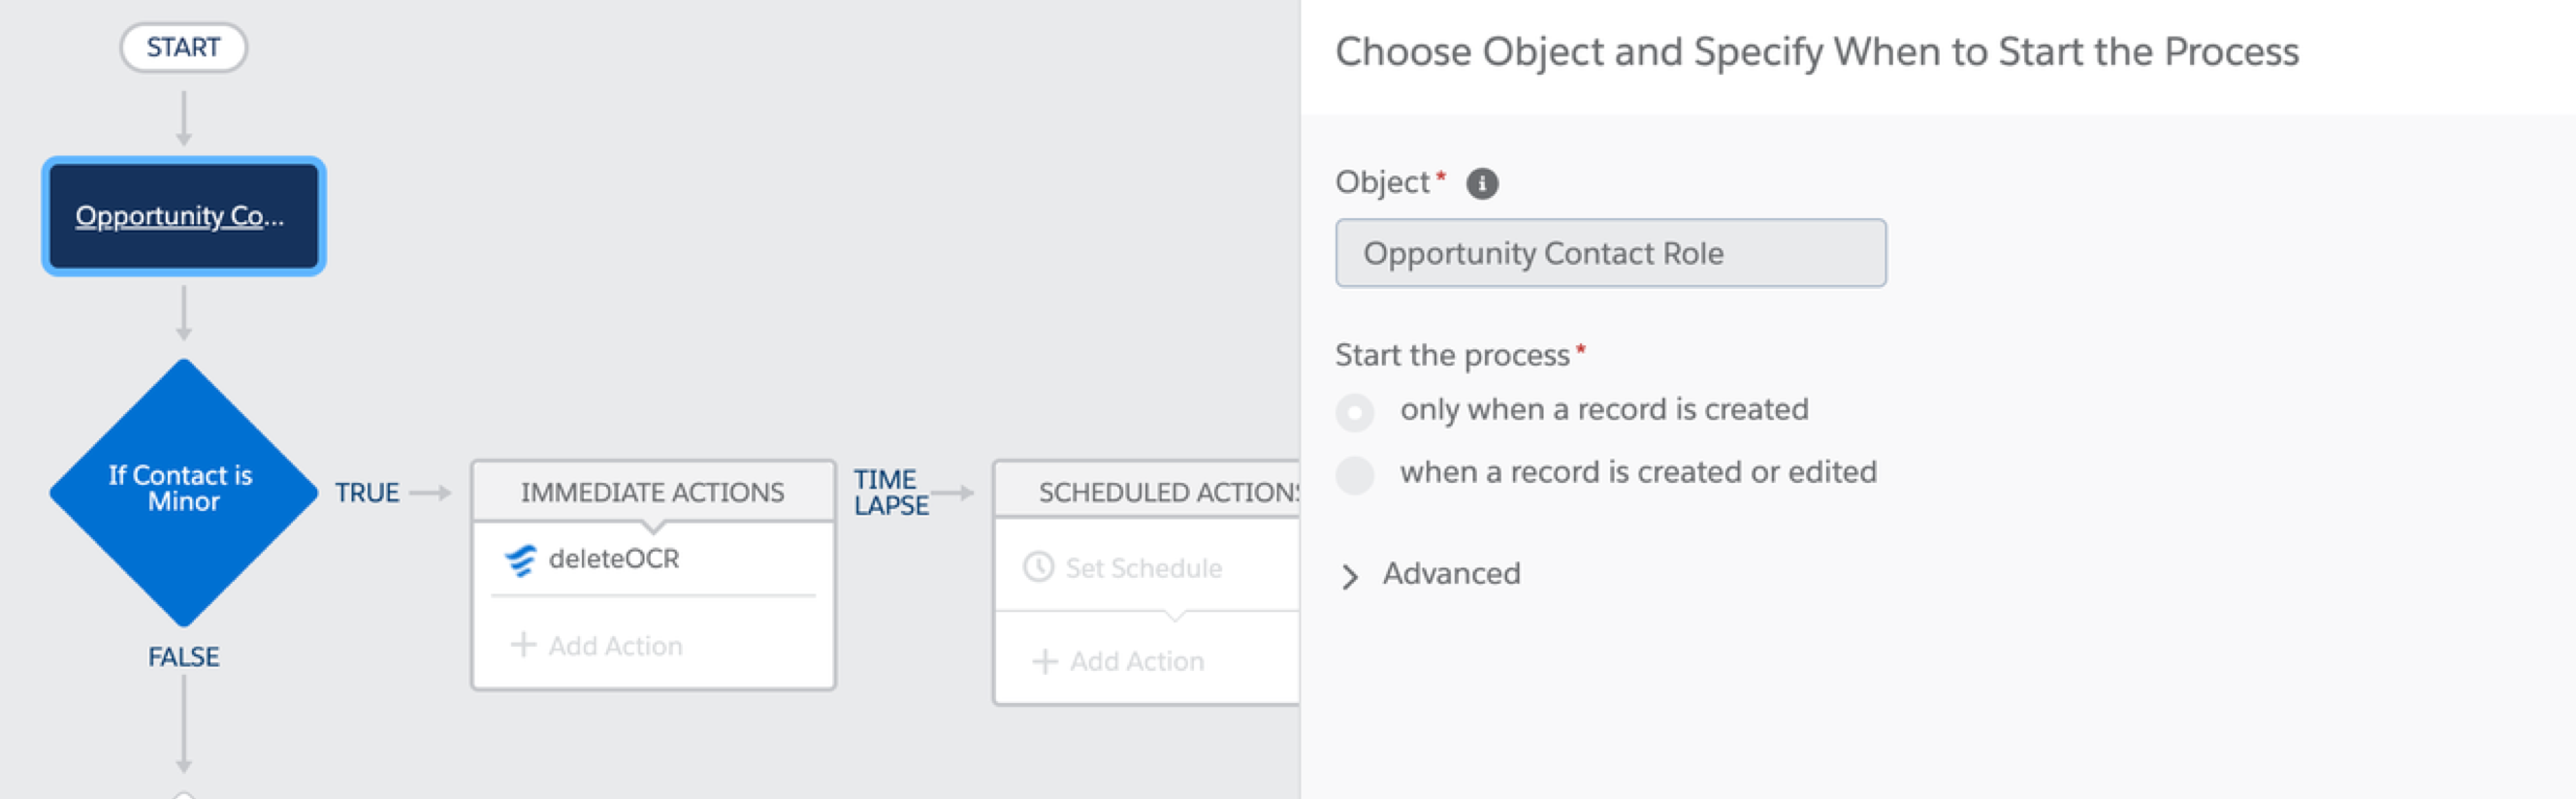 Process Builder specifying when to start the process with the Opportunity Contact Role